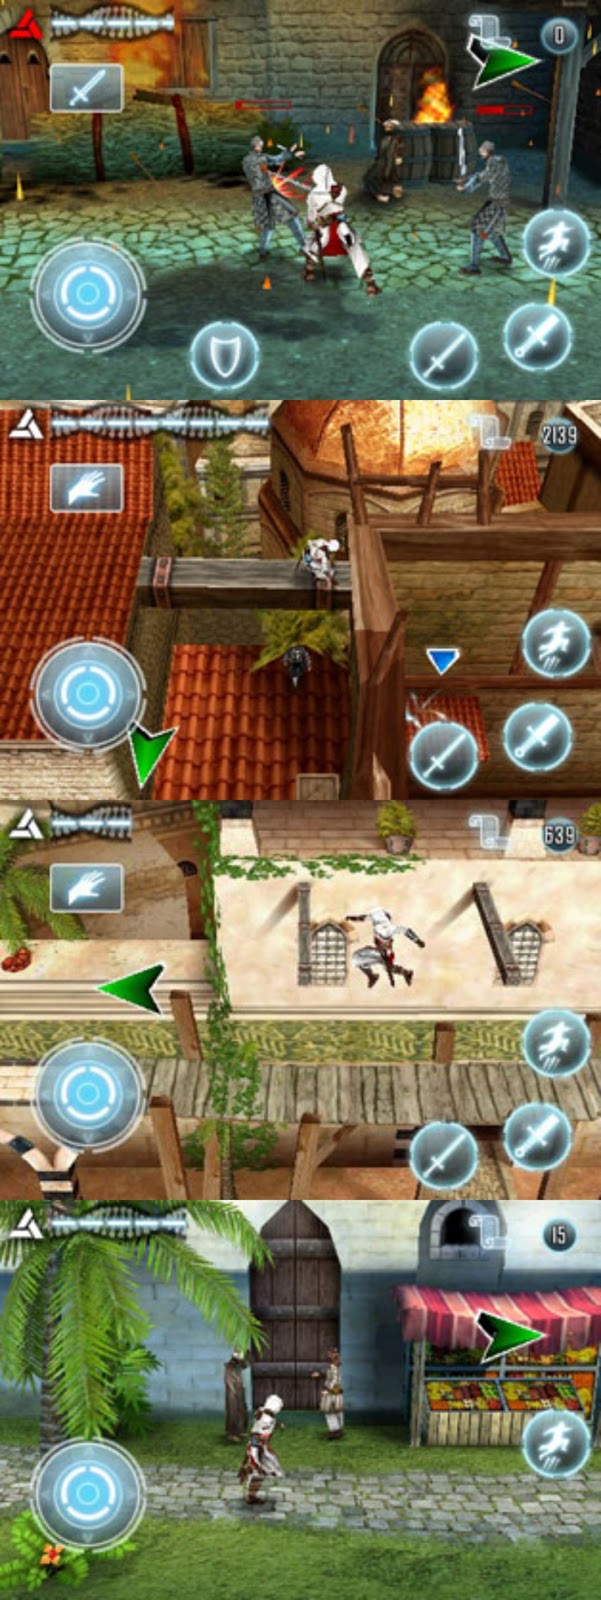 Spiderman 3 Games Free Download For Android